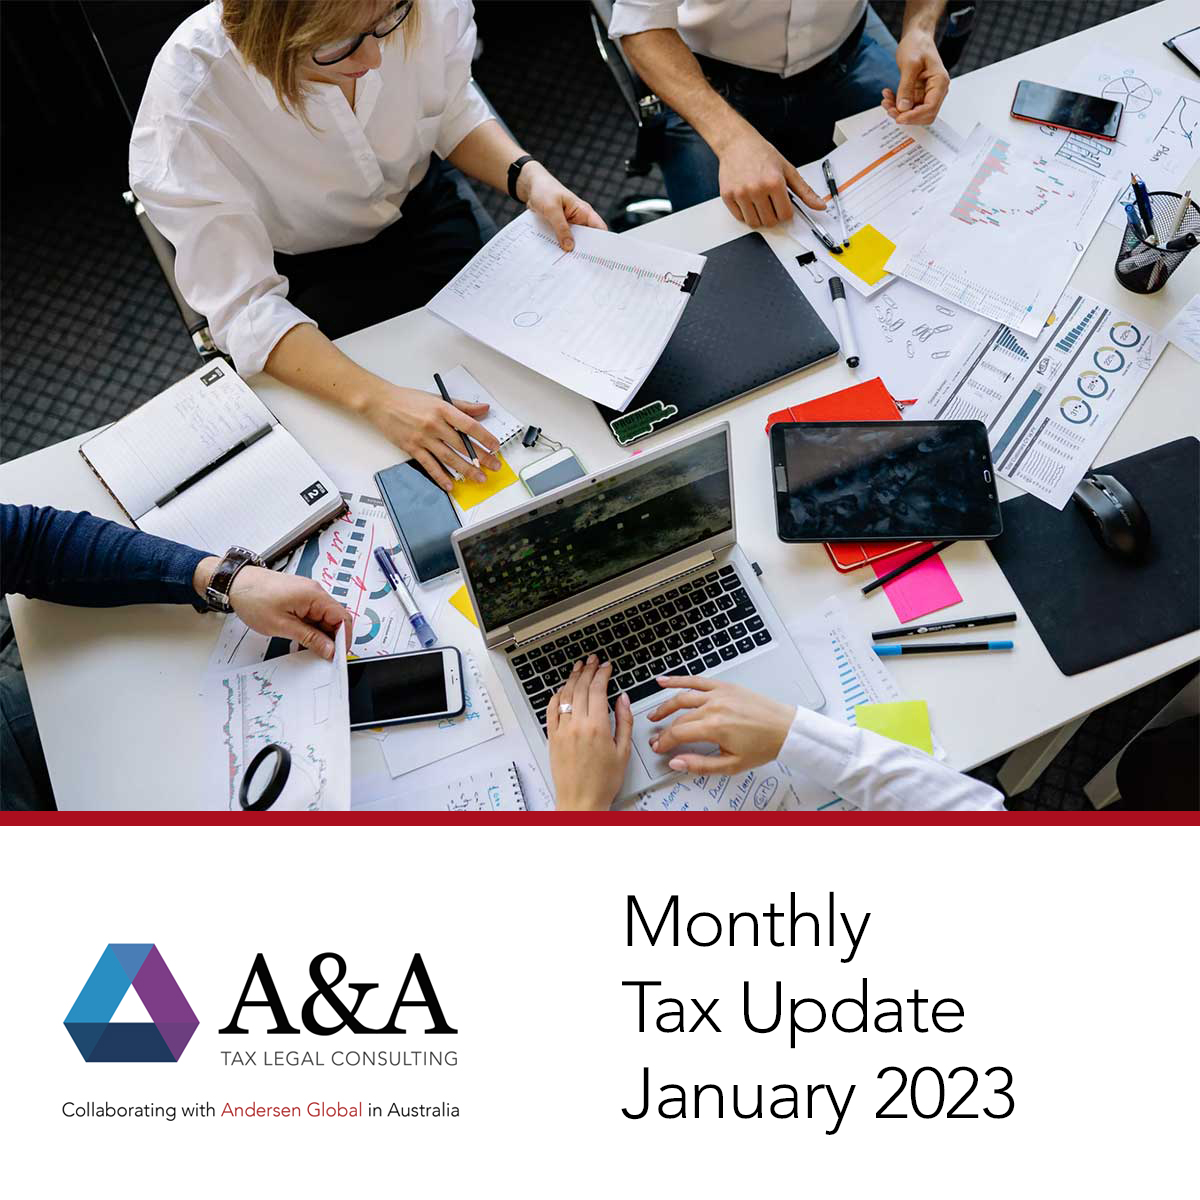 Monthly Tax Update January 2023. Read article at aa.tax/blog/monthly-t… #monthlytaxupdate #legislation #australiantax #incometax #corporatetax #OECD #familytax #reporting #taxadministration #taxcases #australia #tax #taxcases #employees #contractors #migration